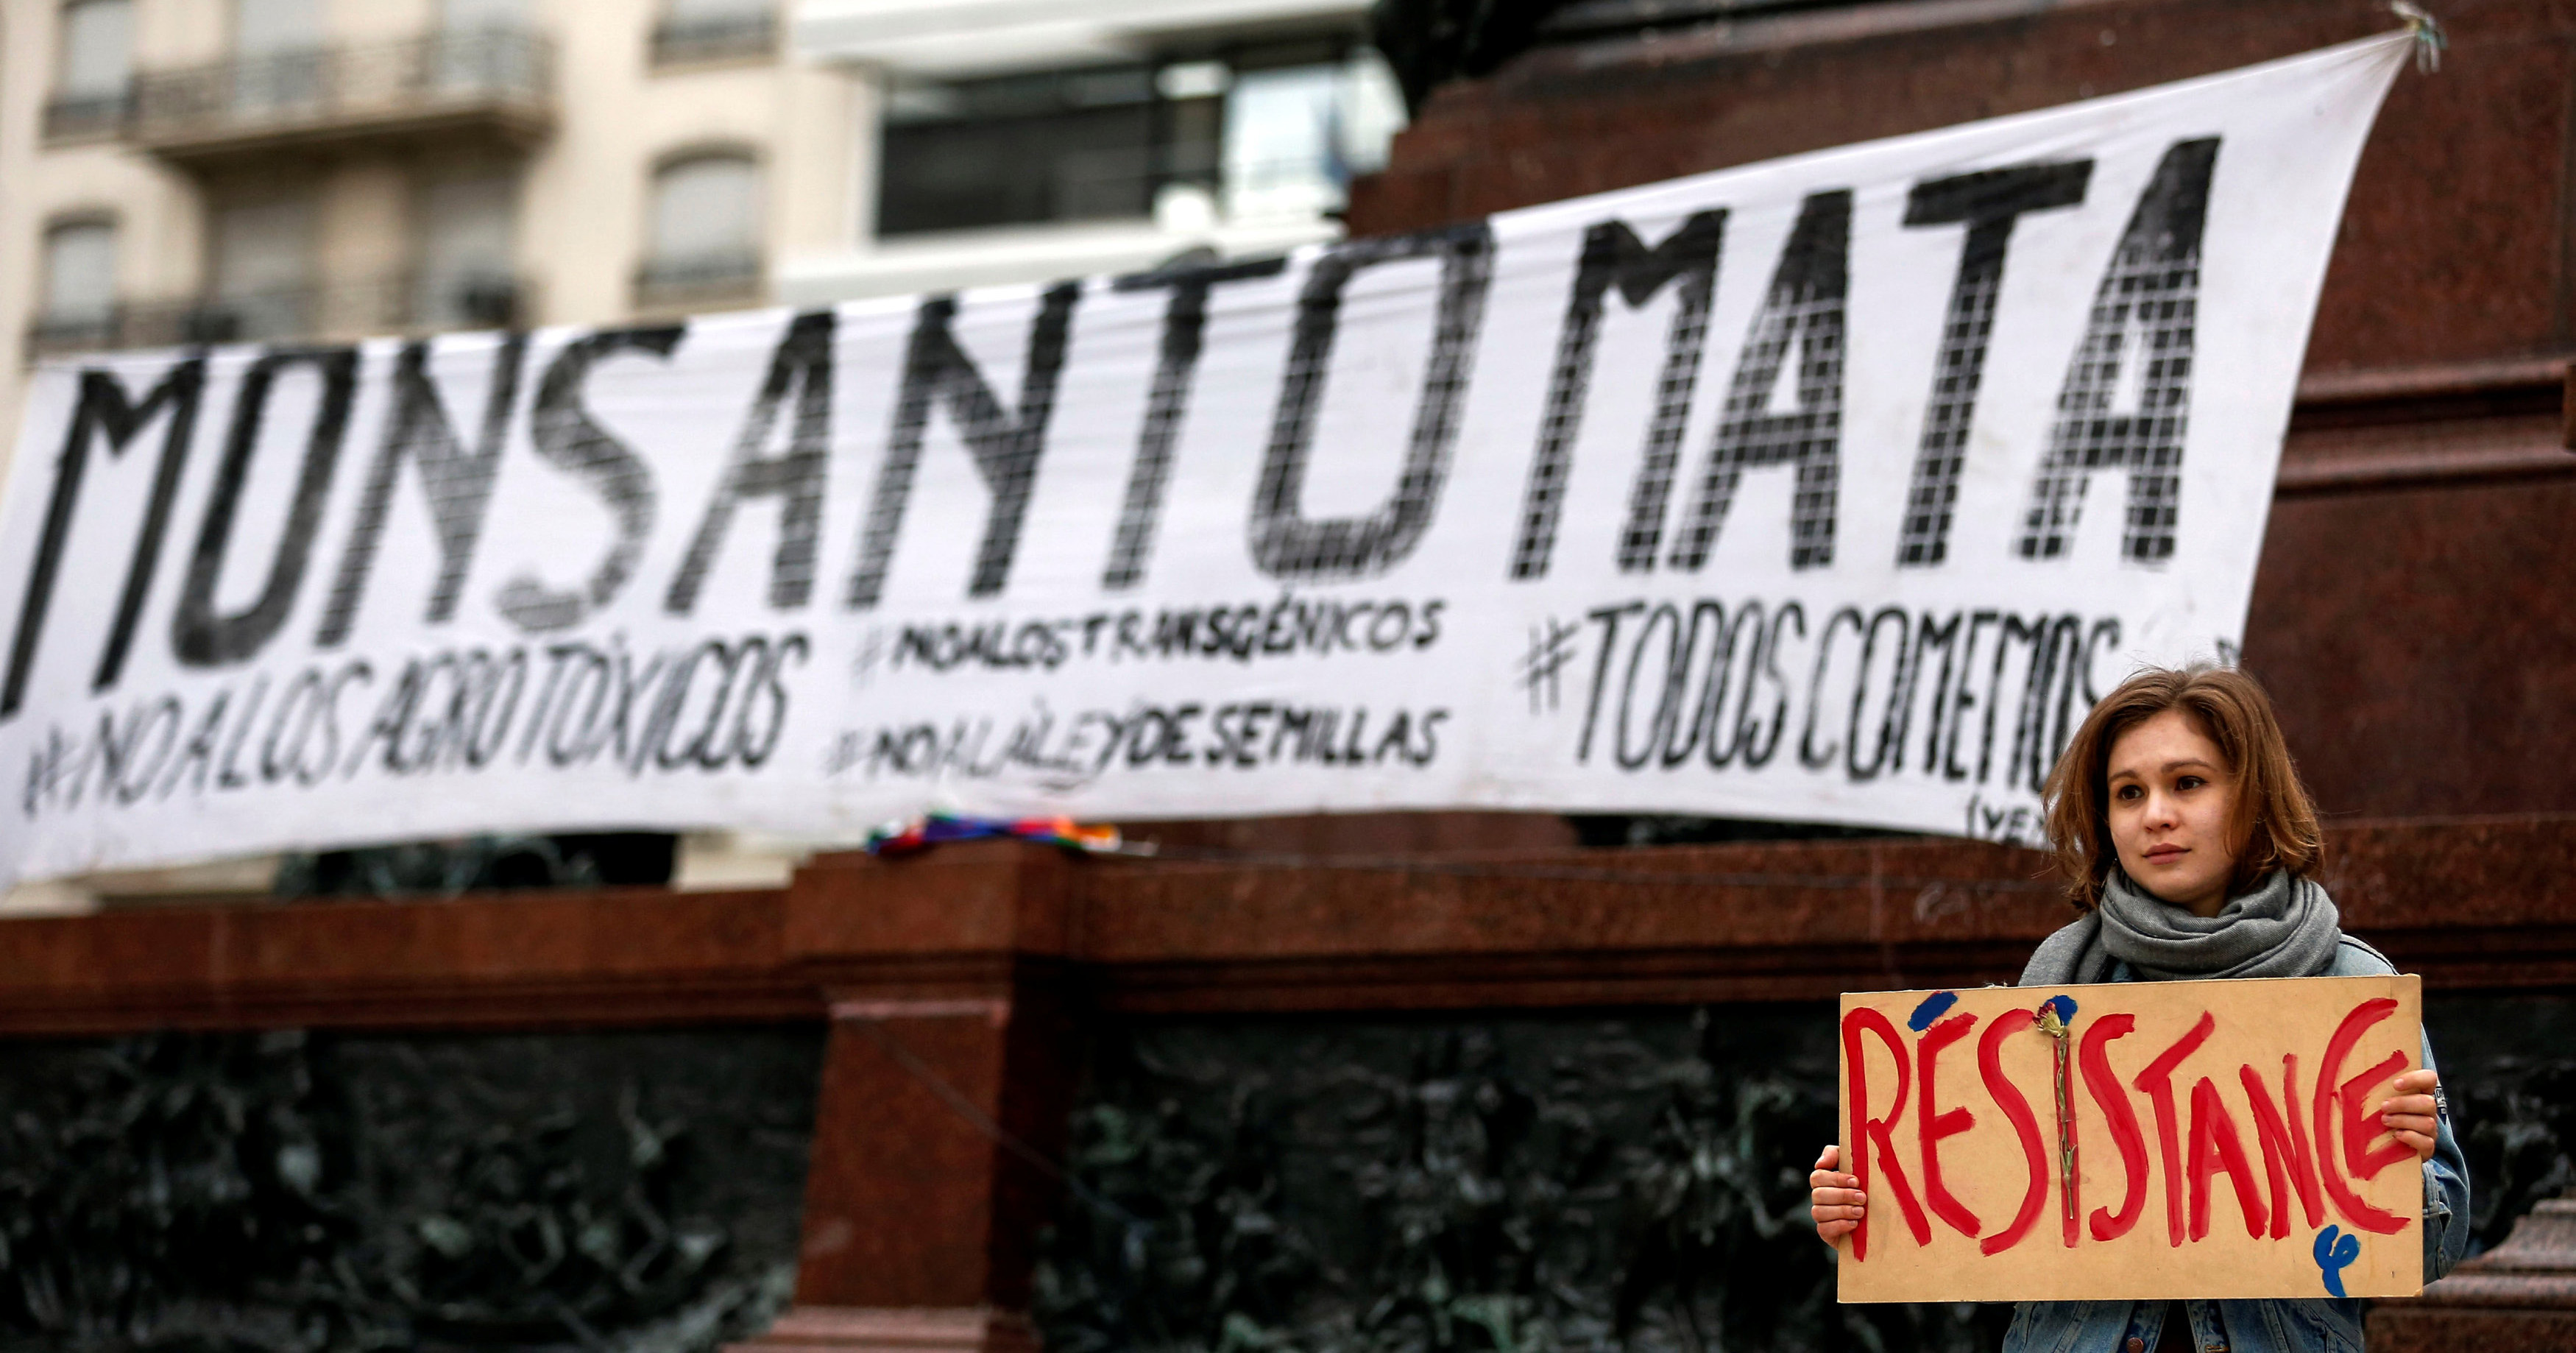 From Canada to Mexico, Activists Speak Out Against Monsanto